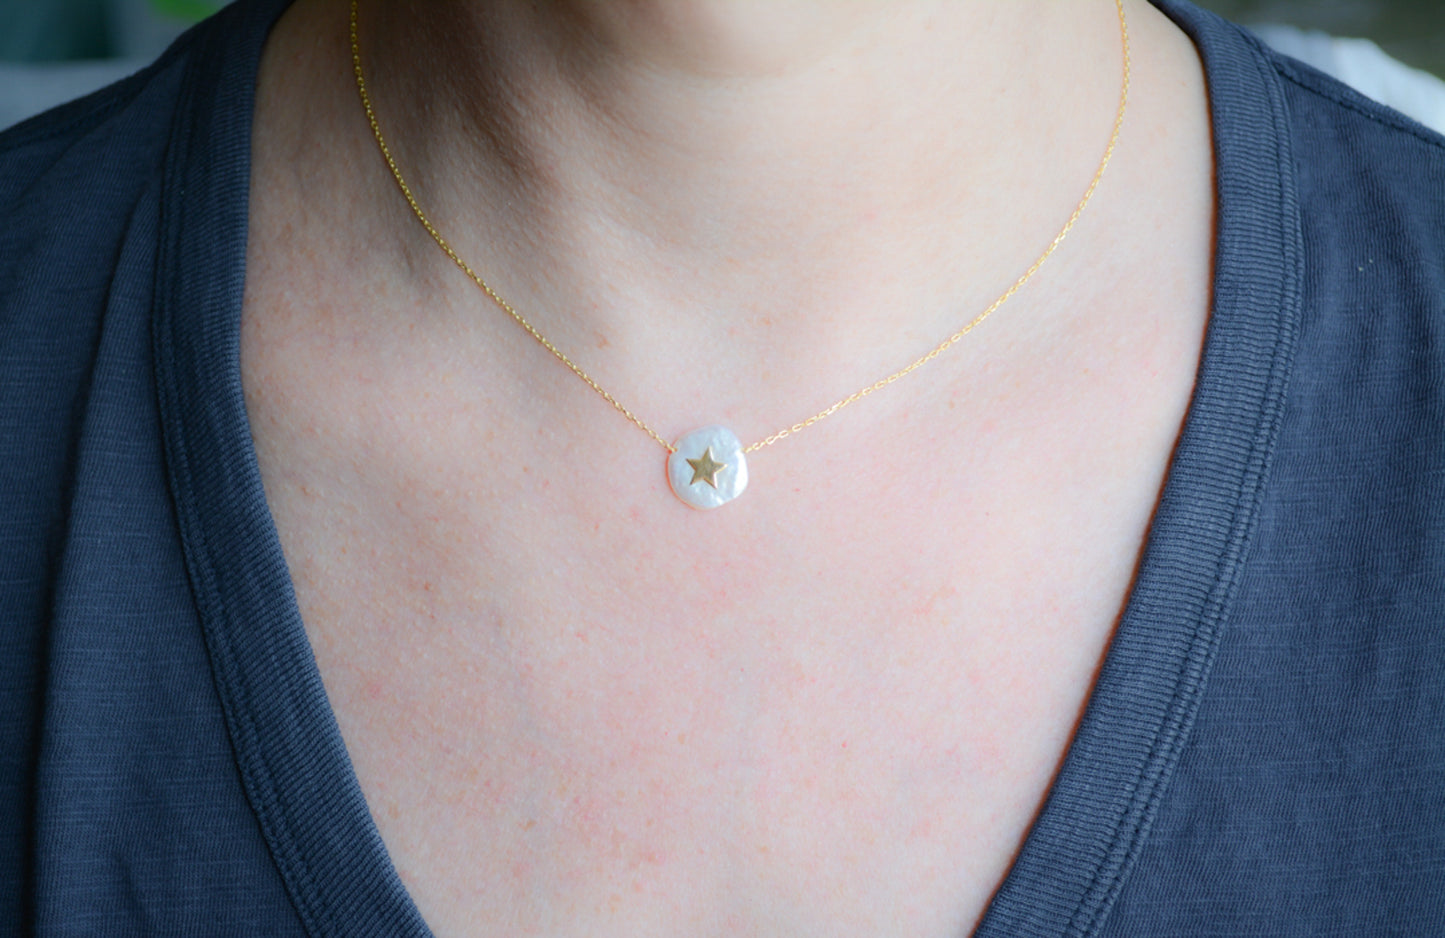 Freshwater pearl necklace with star